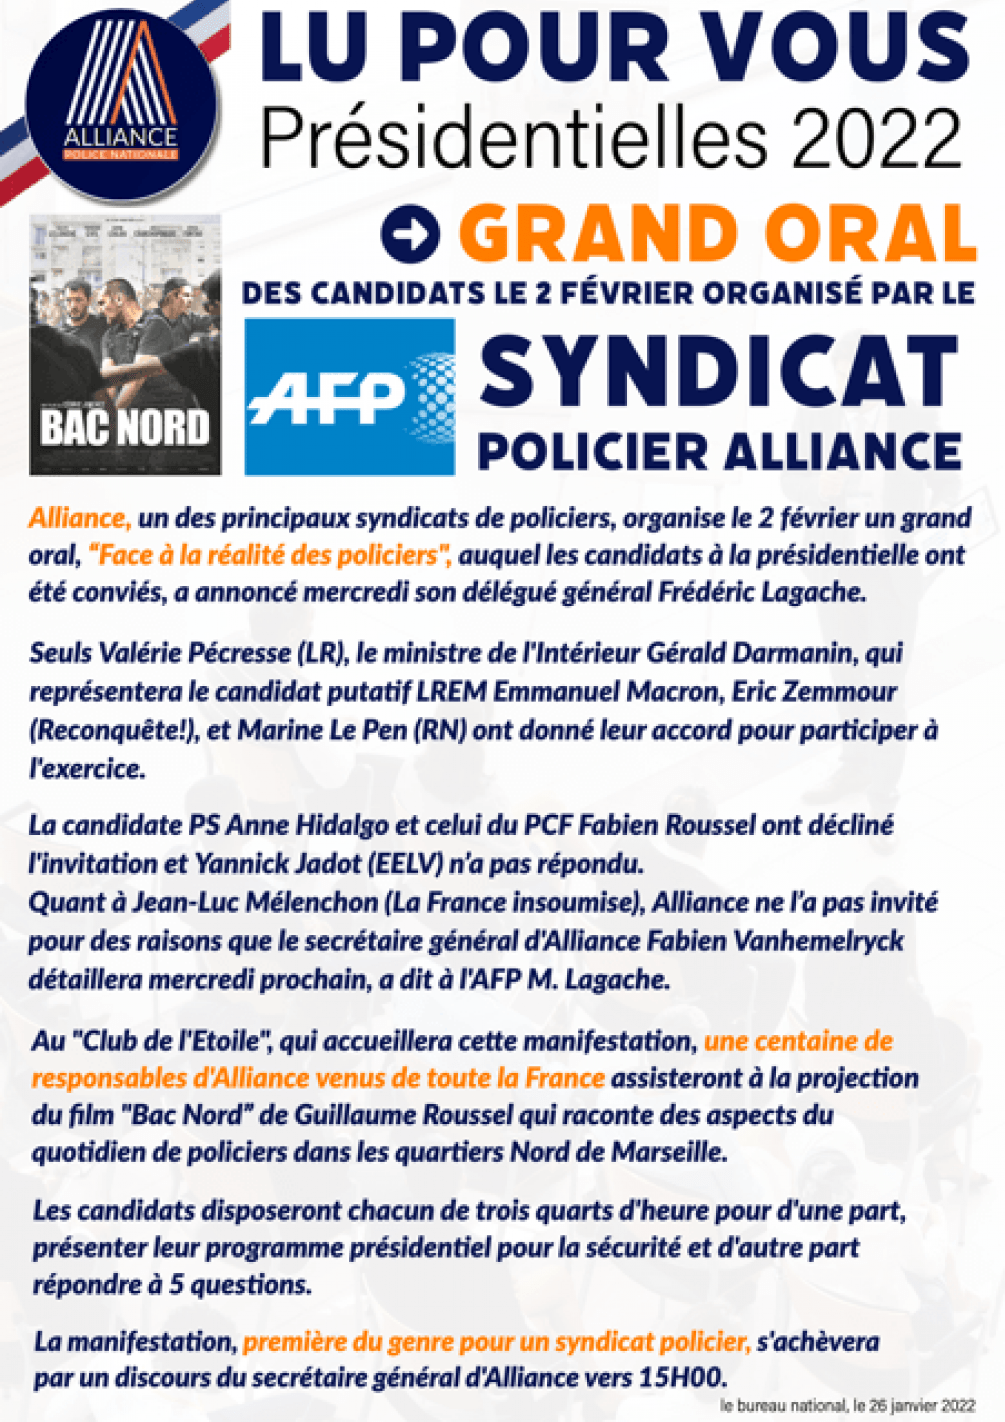 Grand Oral Bac Nord 